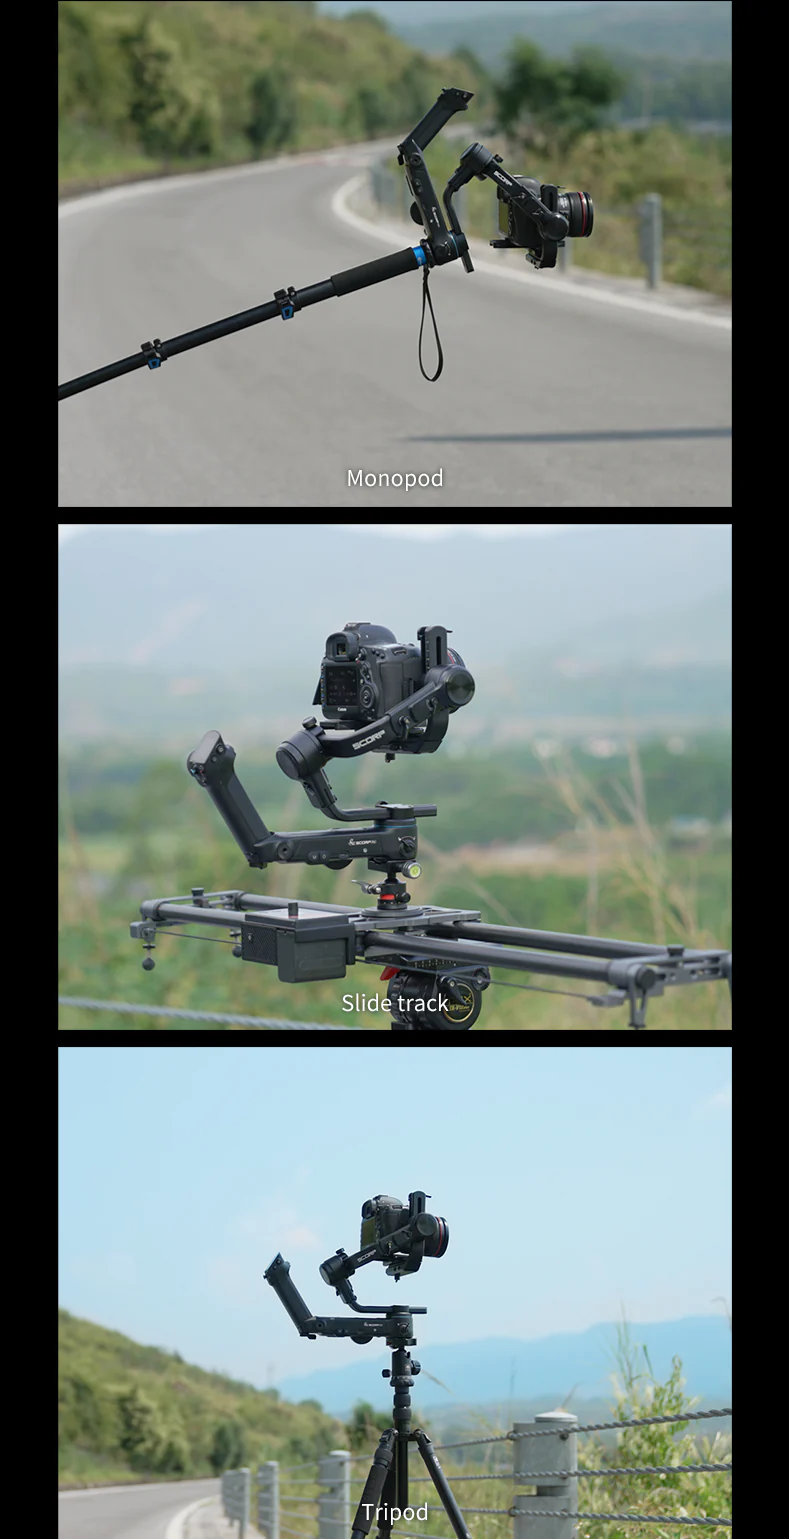 SCORP Pro Detachable 3-Axis Professional Gimbal Stabilizer for DSLR Mirrorless Camera